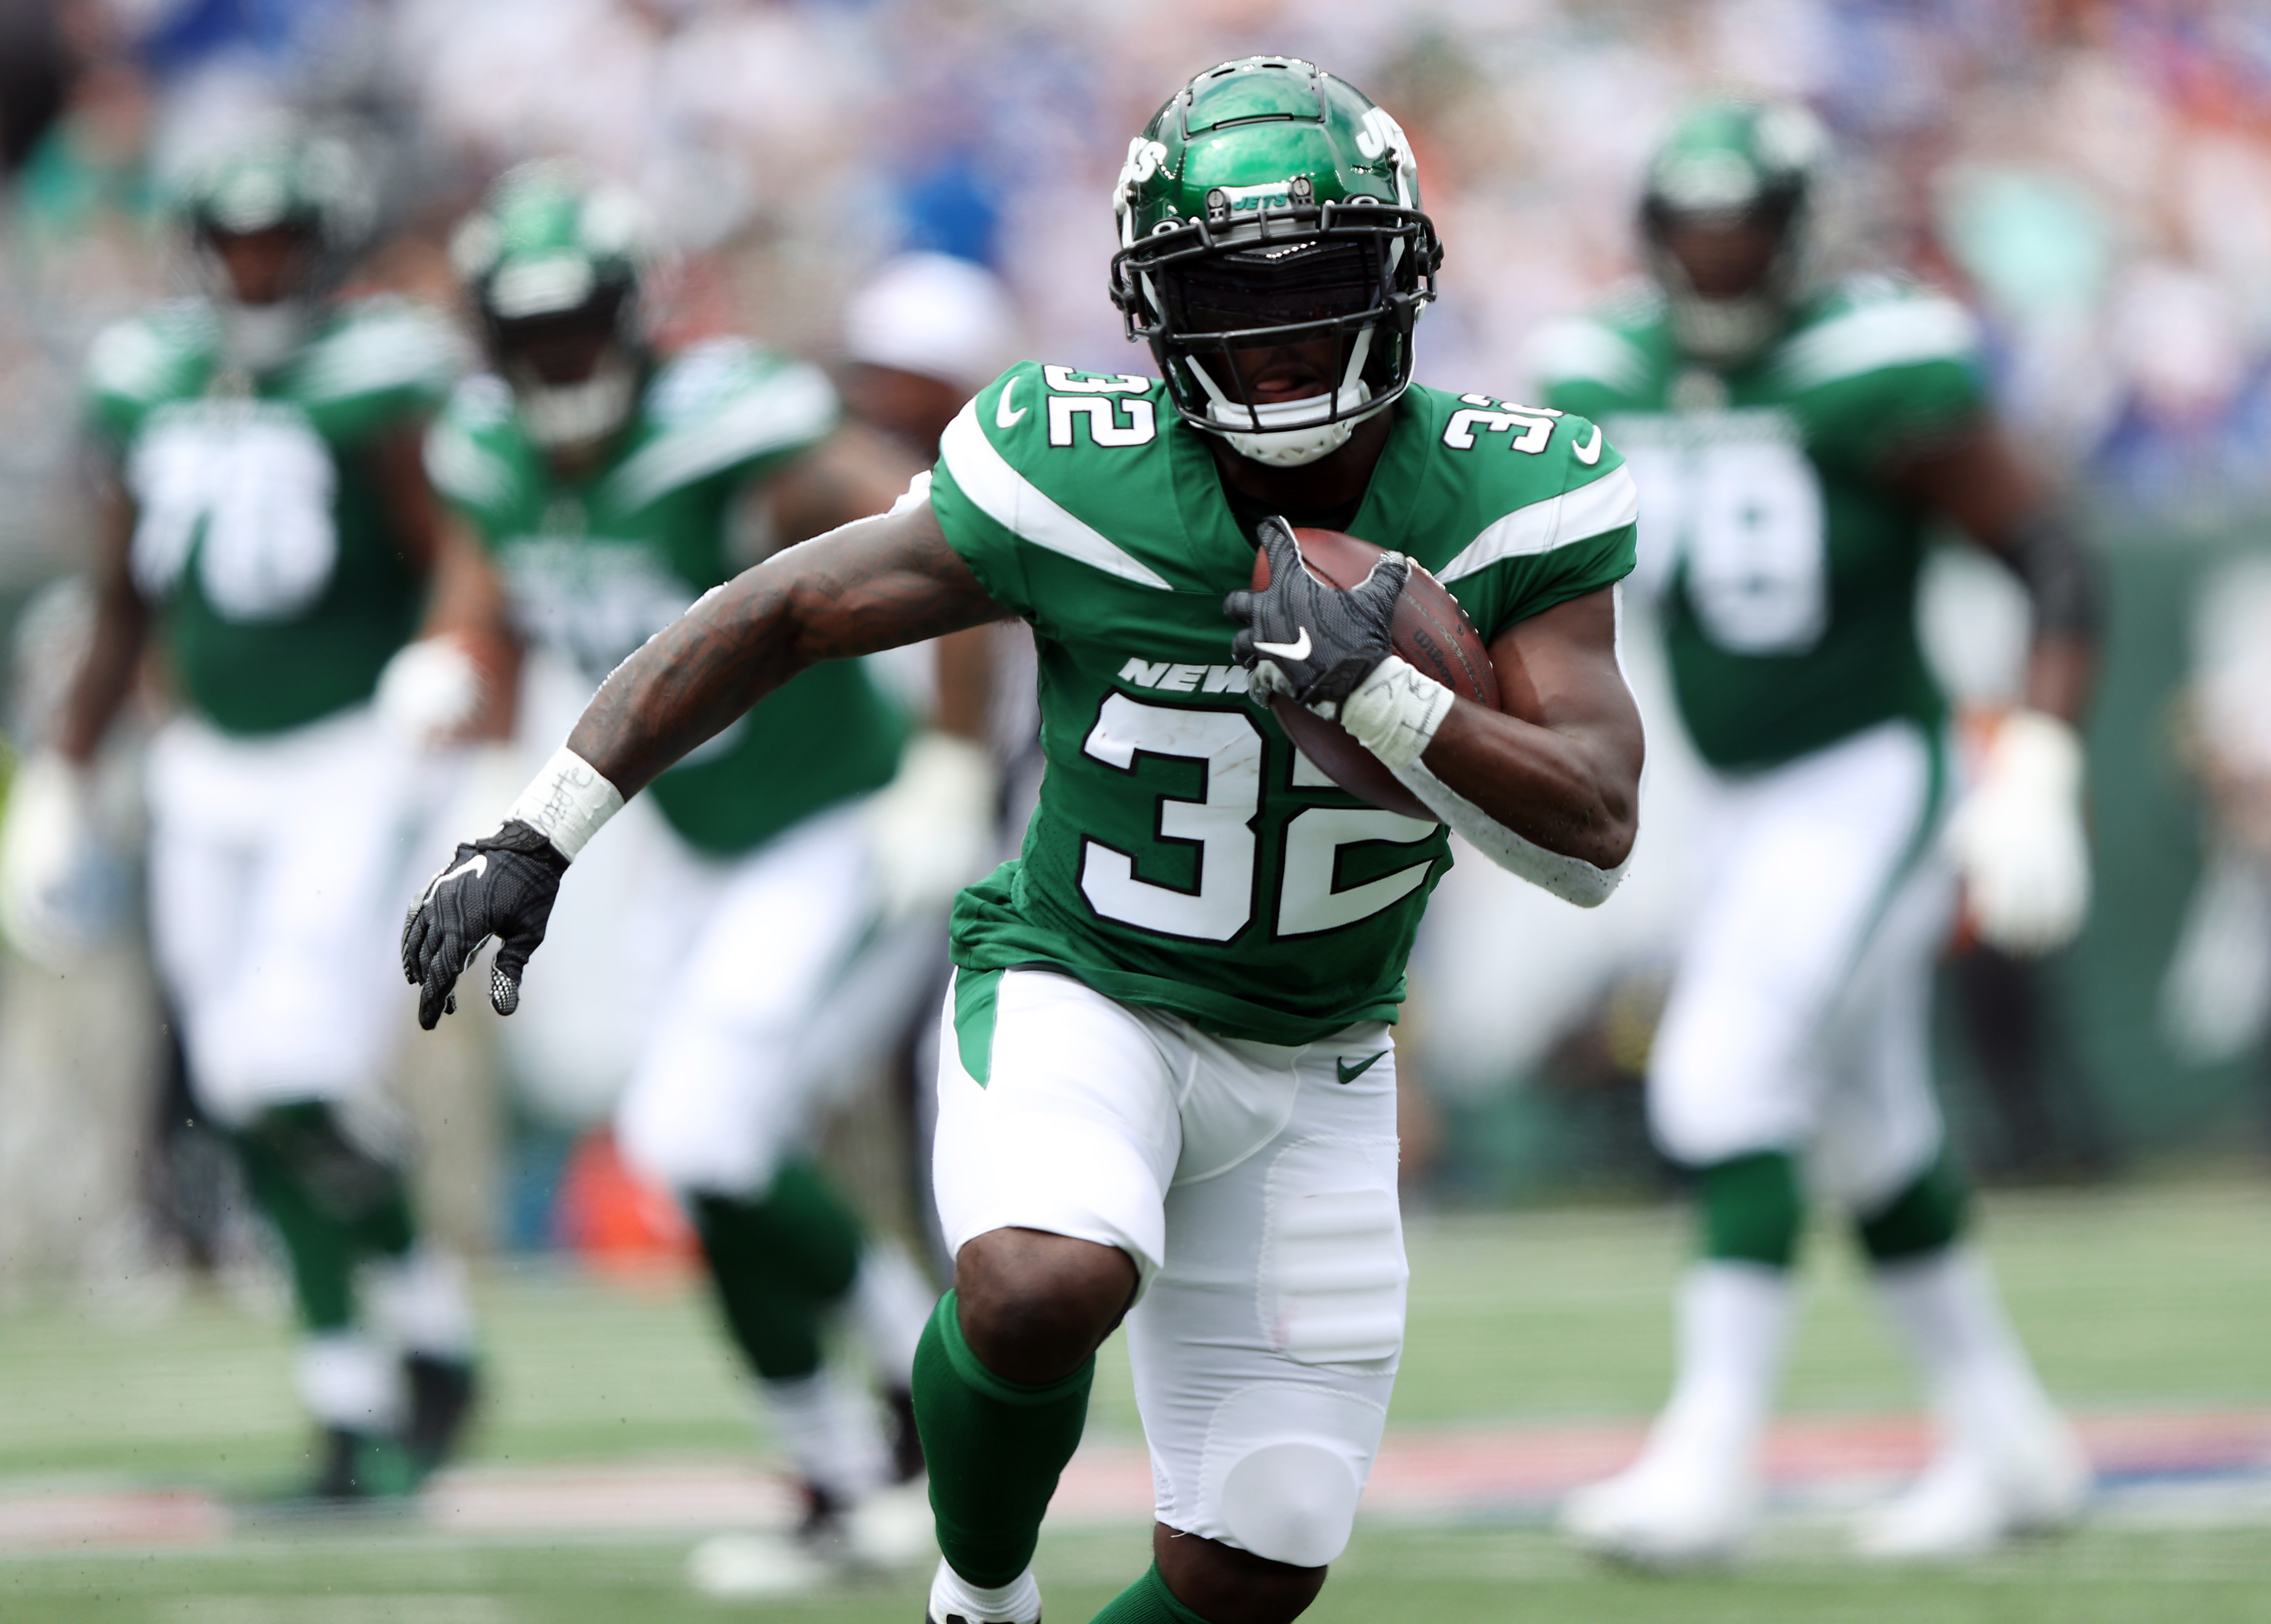 Running back Michael Carter #32 of the New York Jets carries the ball during the 1st half of the preseason game against the New York Giants at MetLife Stadium on August 28, 2022 in East Rutherford, New Jersey.